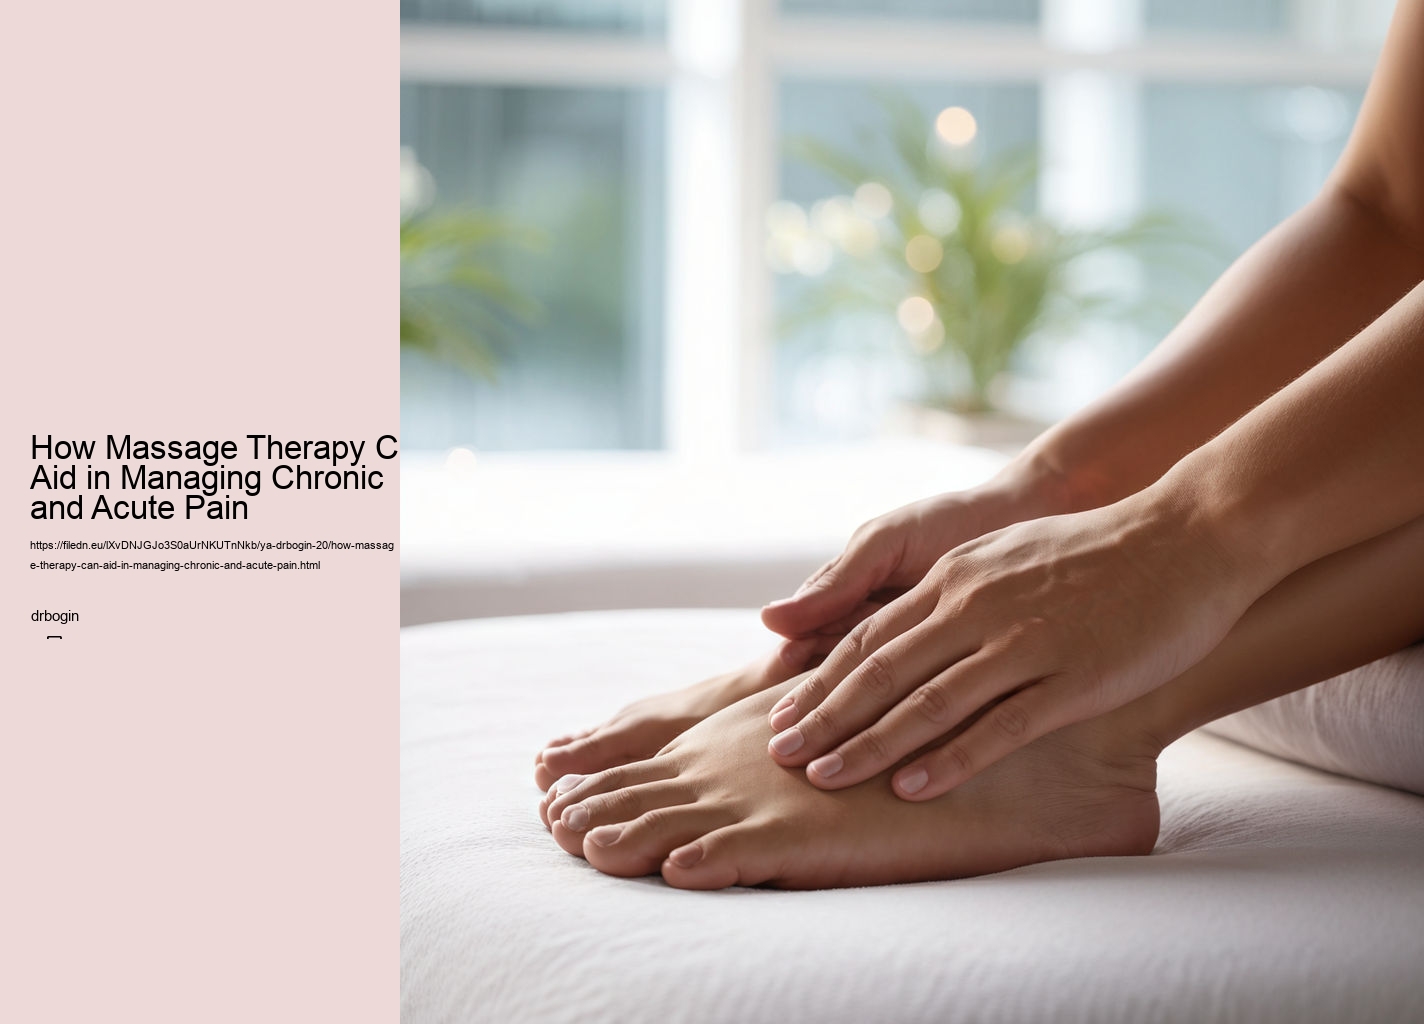 How Massage Therapy Can Aid in Managing Chronic and Acute Pain